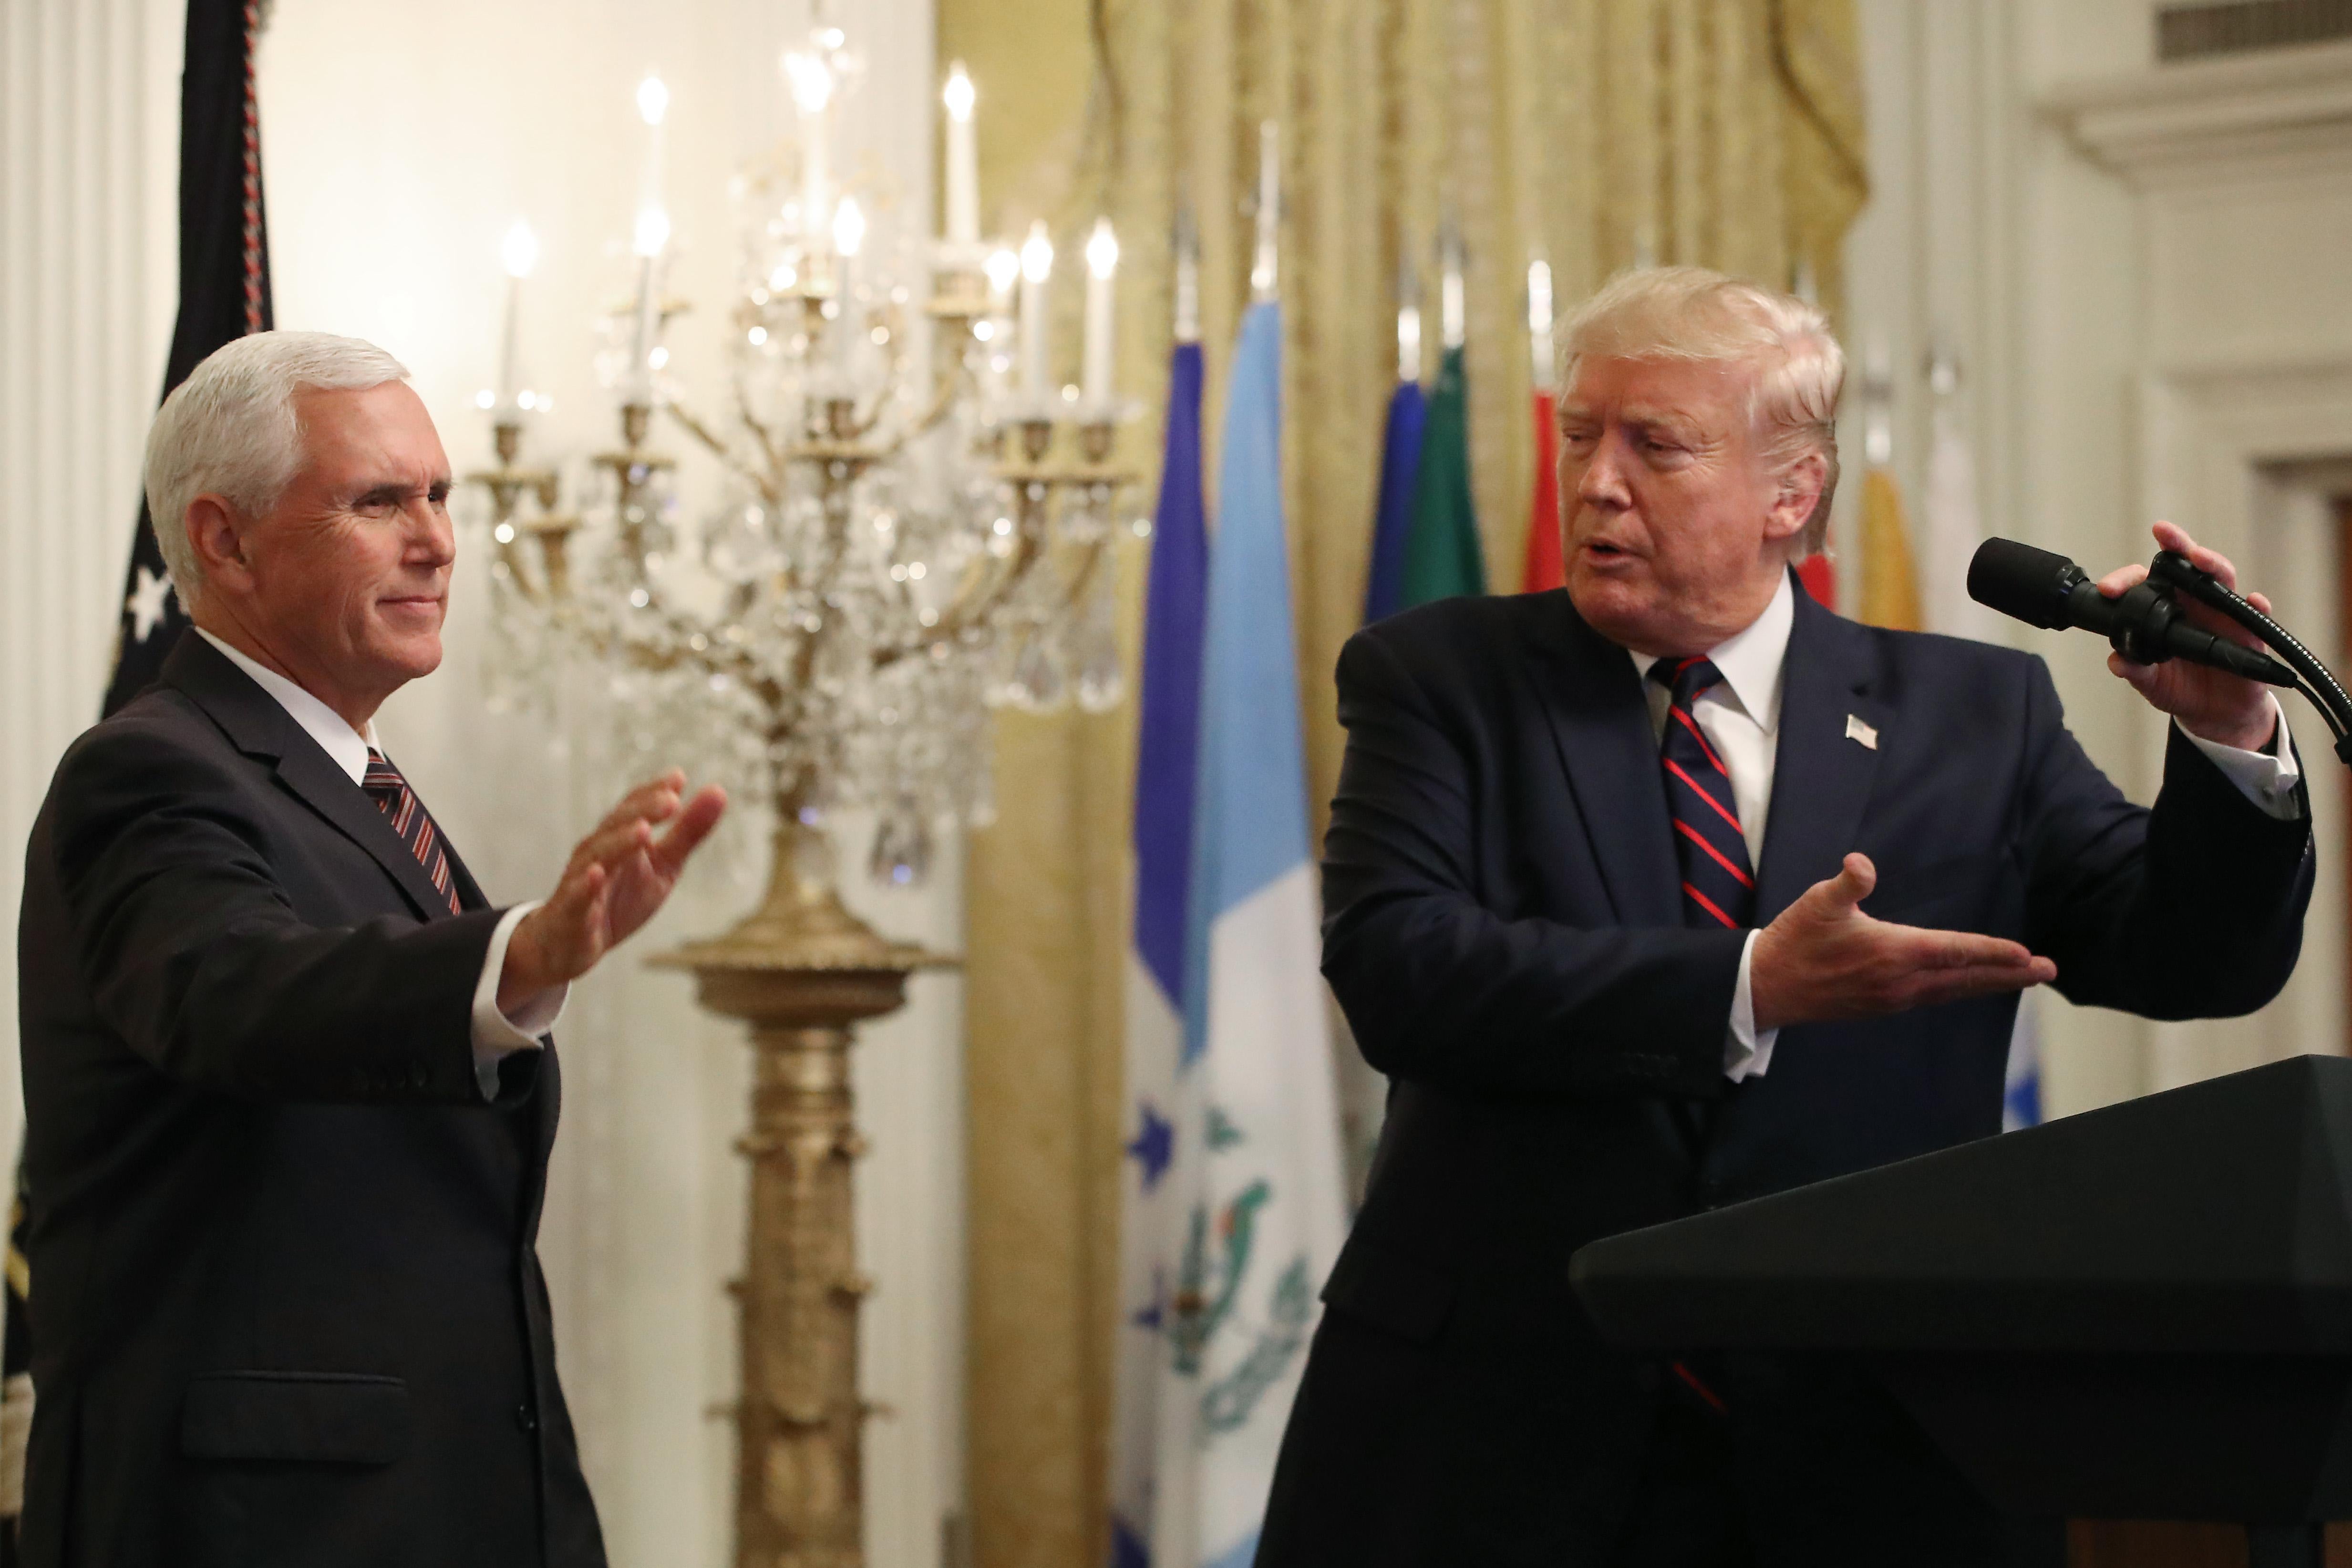 President Donald Trump invites Vice President Mike Pence to speak during a reception to honor Hispanic Heritage Month, in The East Room at the White House on September 27, 2019 in Washington, D.C.